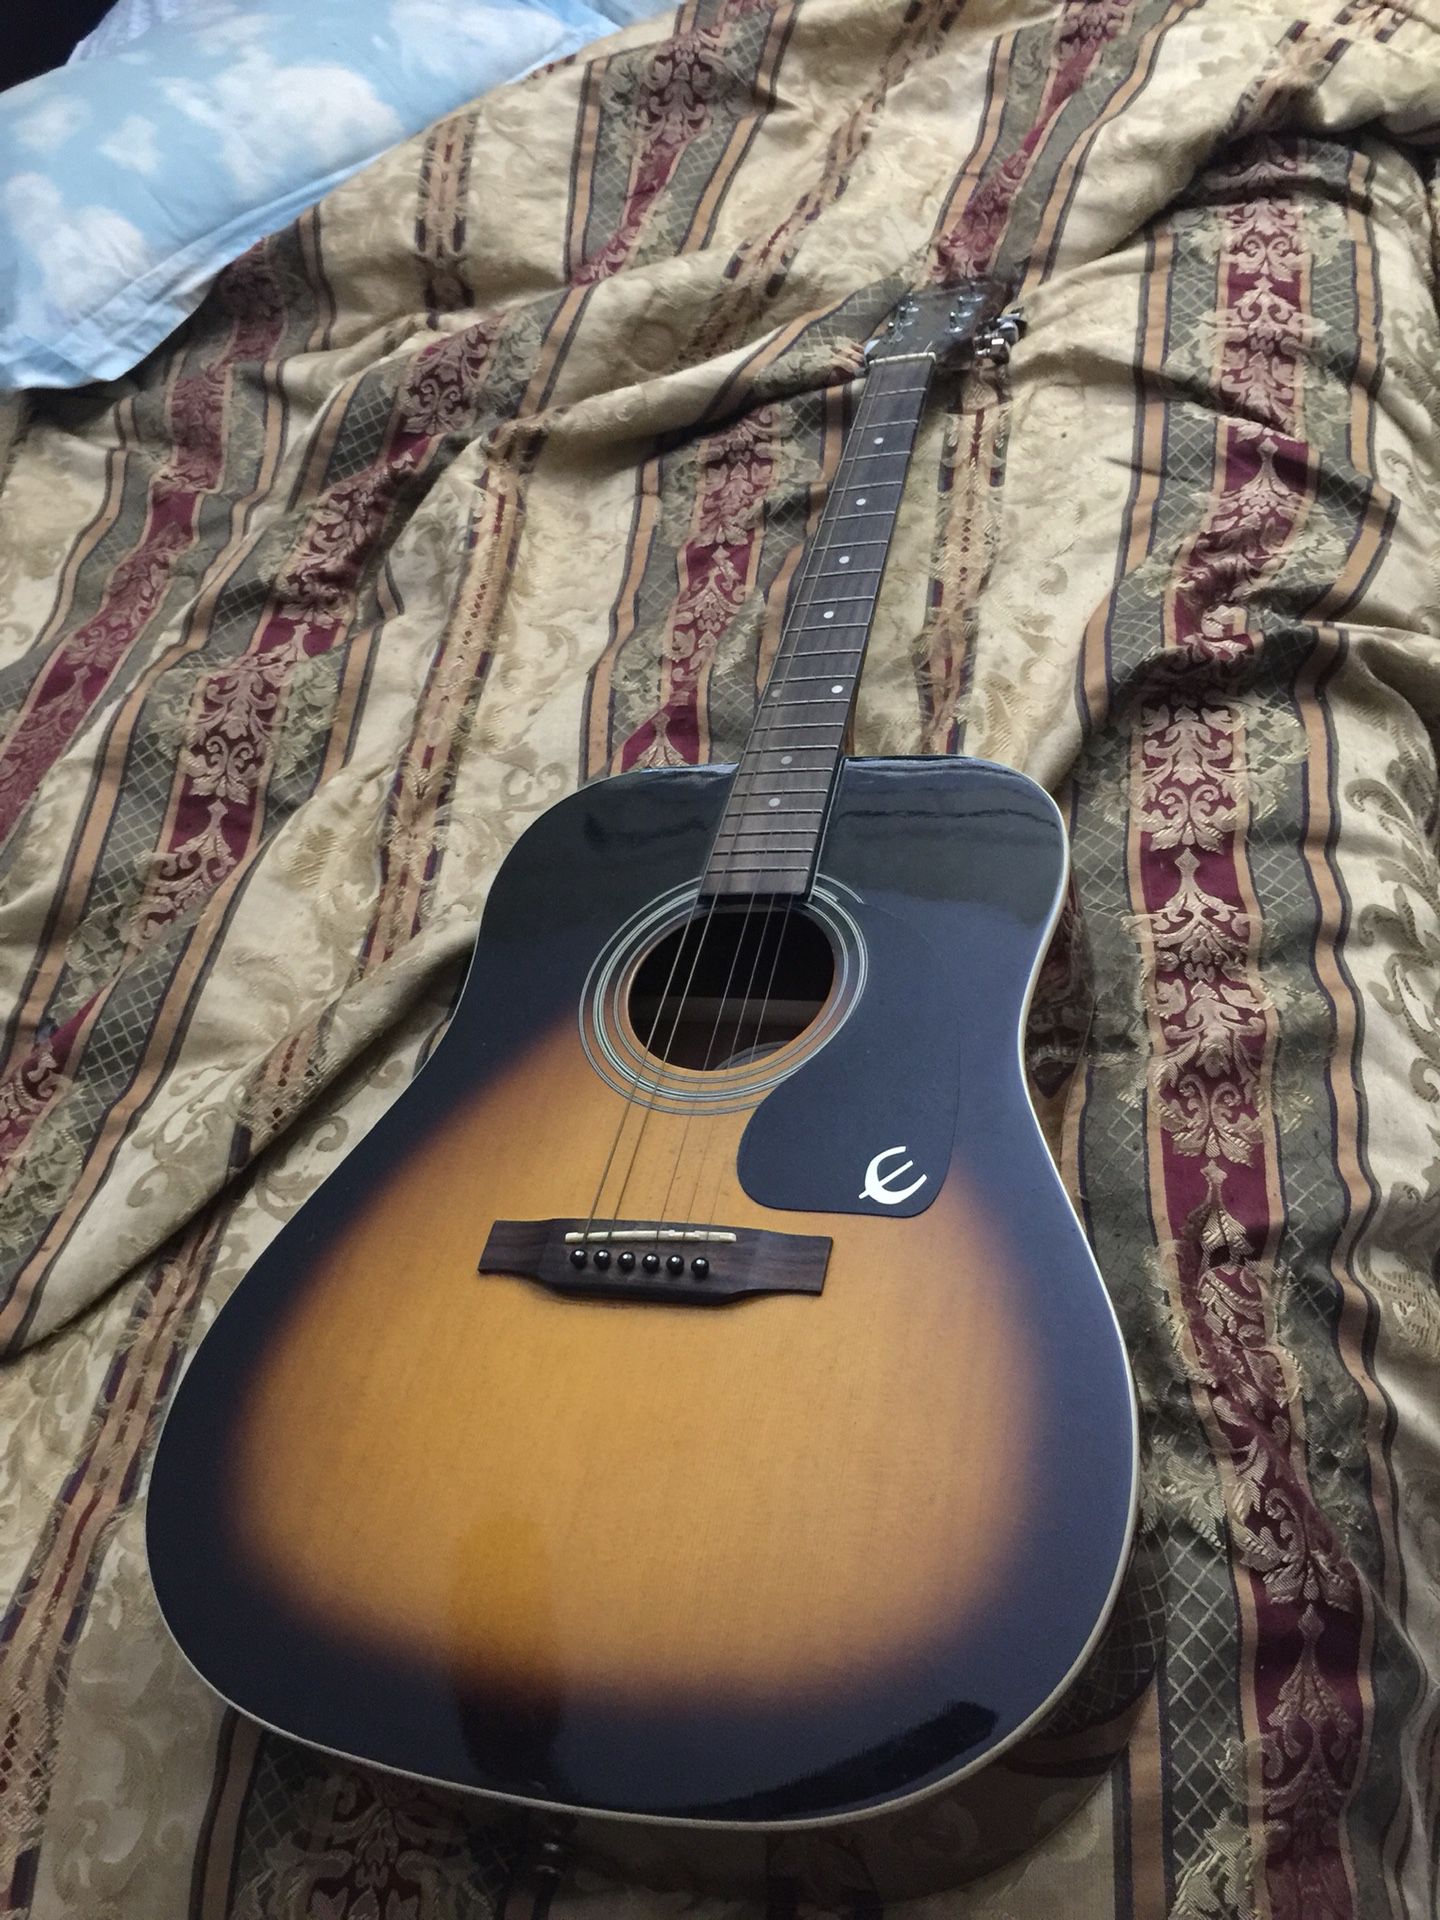 Epiphone acoustic guitar perfect condition